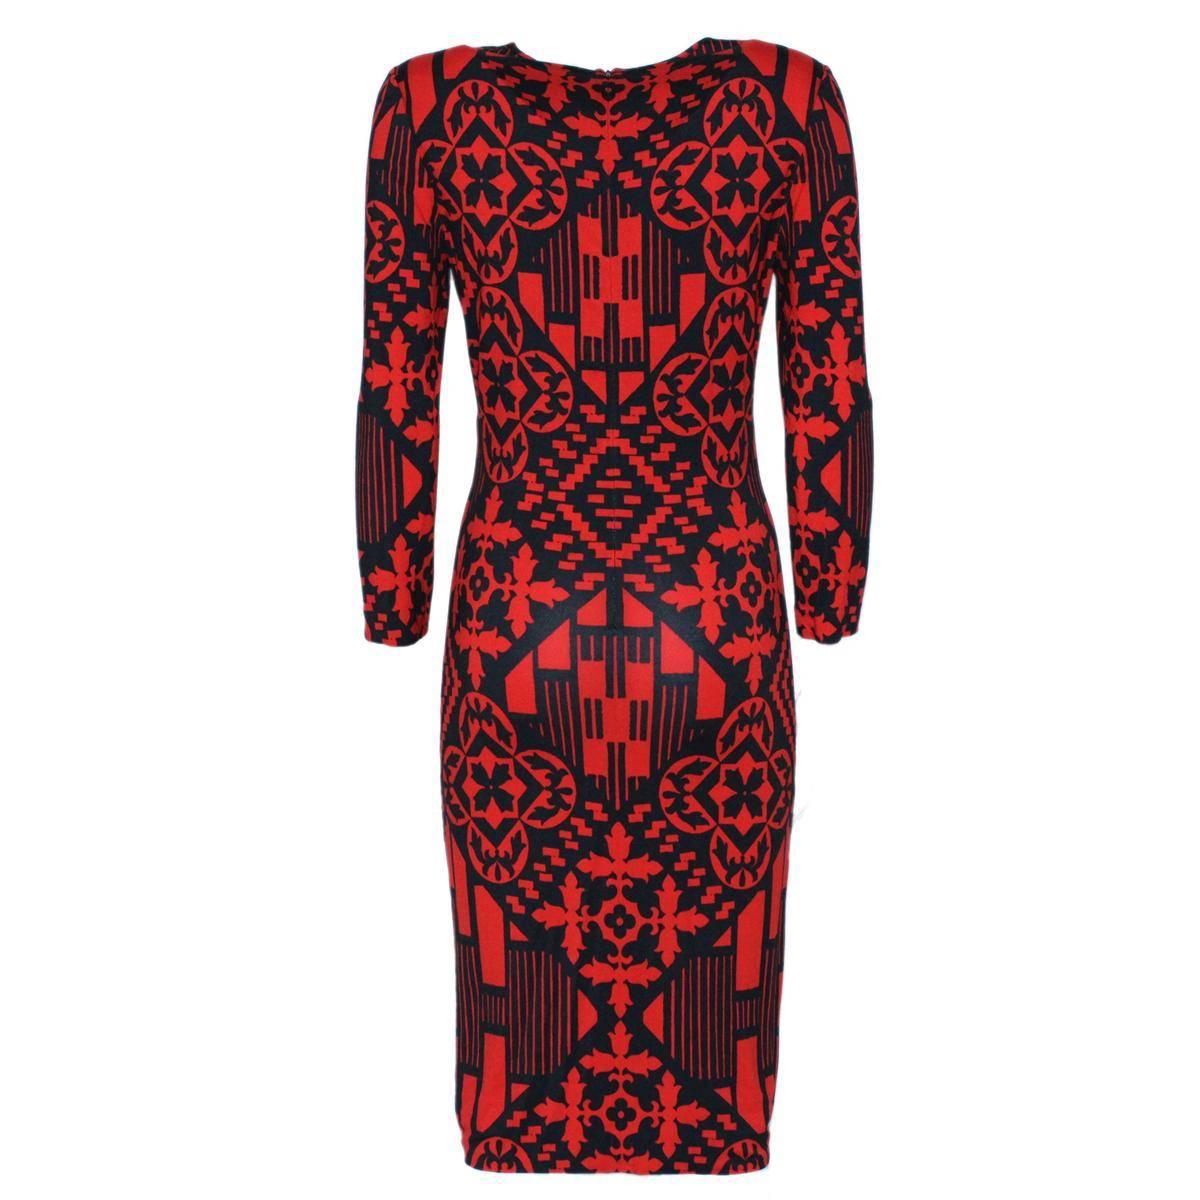 Beautiful style !
Optical dress
Mixed textile
Optical theme
Red & black color
Long sleeve
Total lenght (shoulder/hem) cm 96 (37.7 inches)
Worldwide express shipping included in the price !